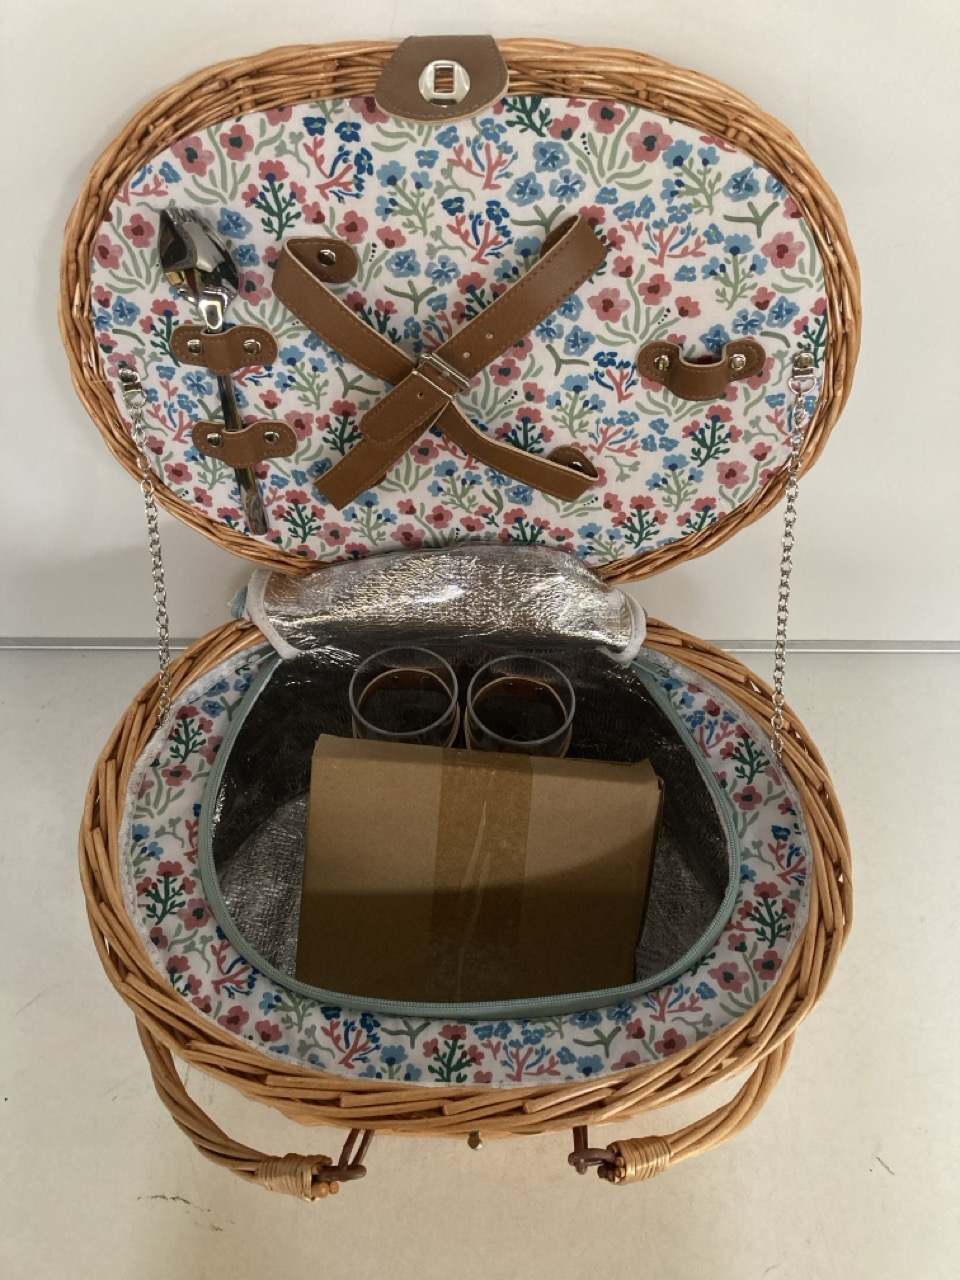 A WICKER PICNIC BASKET TOGETHER WITH PICNIC RUGS , PLATES & BOWLS